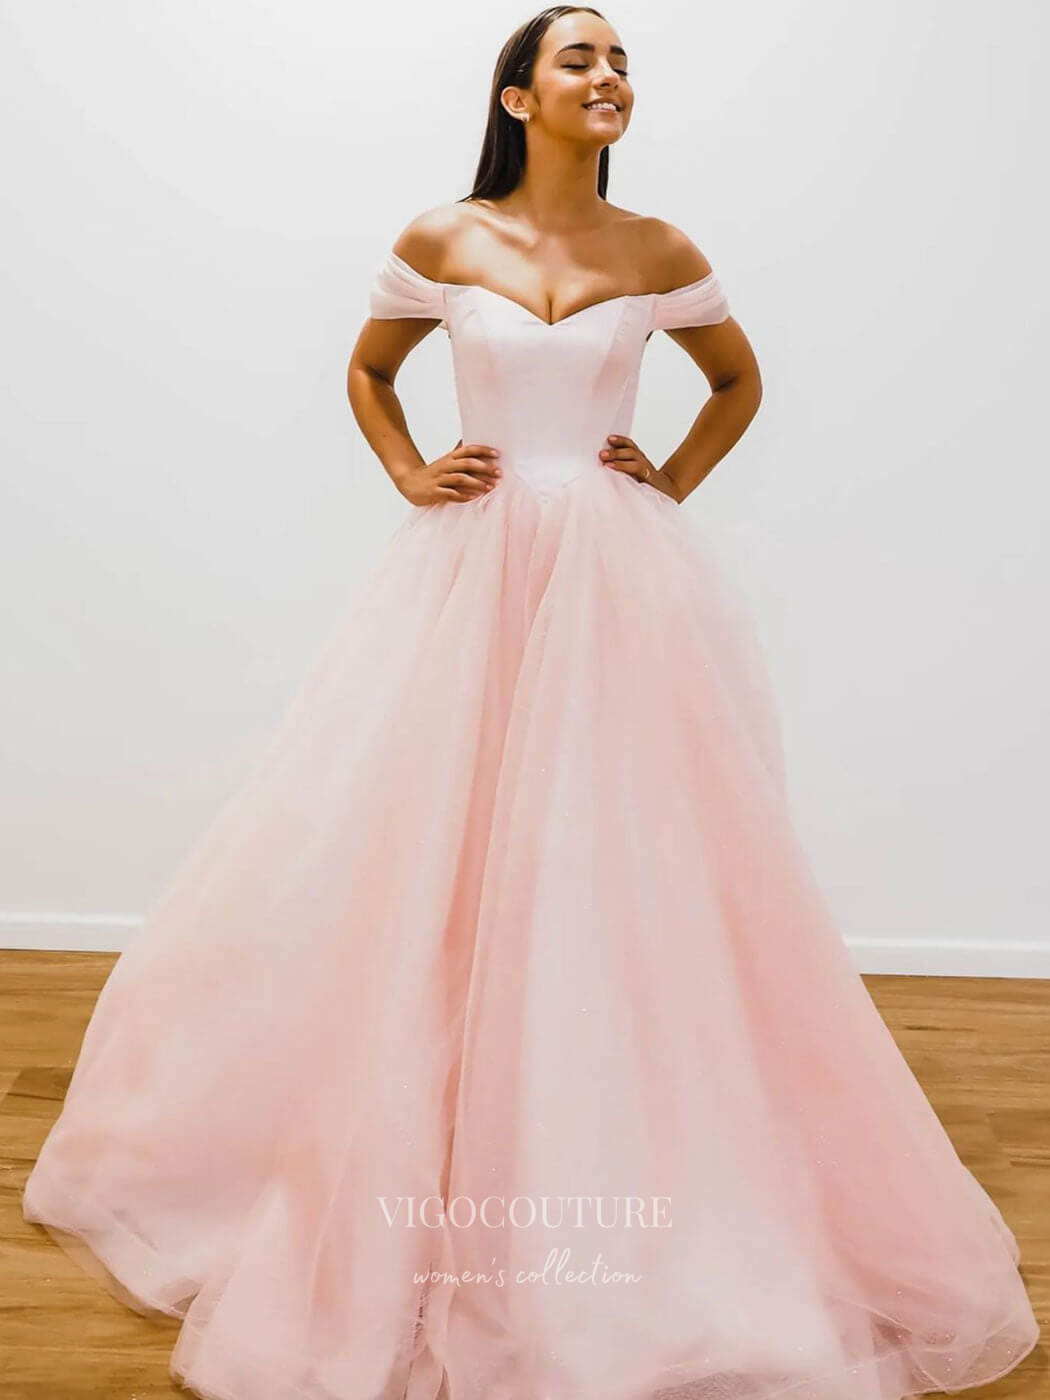 vigocouture-Blush Pink Off the Shoulder Prom Dresses Tulle A-Line Evening Dress 21769-Prom Dresses-vigocouture-Blush-US2-